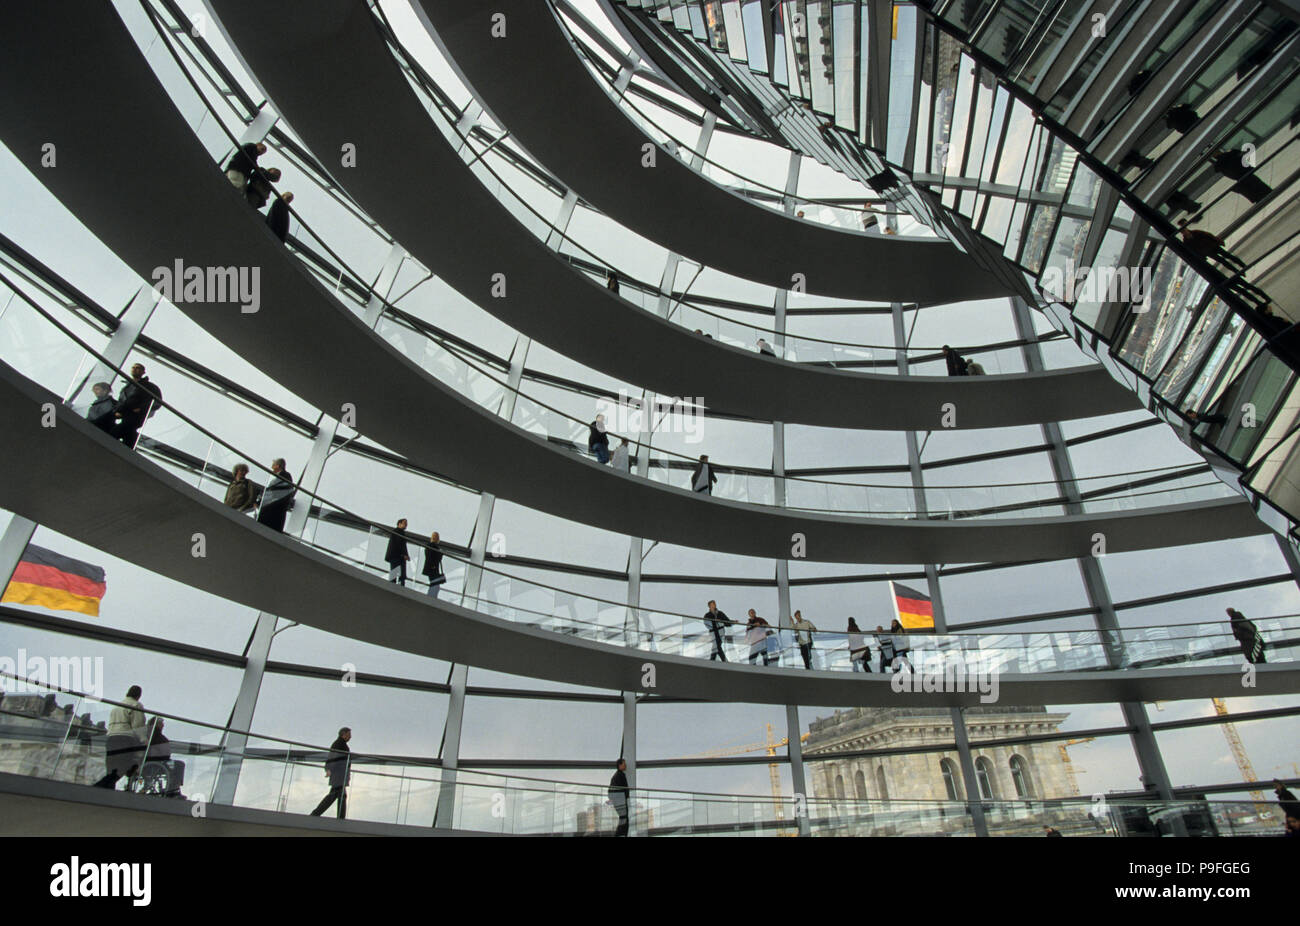 GERMANY, Berlin, Reichstag building today seat of german parliament Bundestag with glass dome with skywalk designed by architect Sir Norman Foster Stock Photo